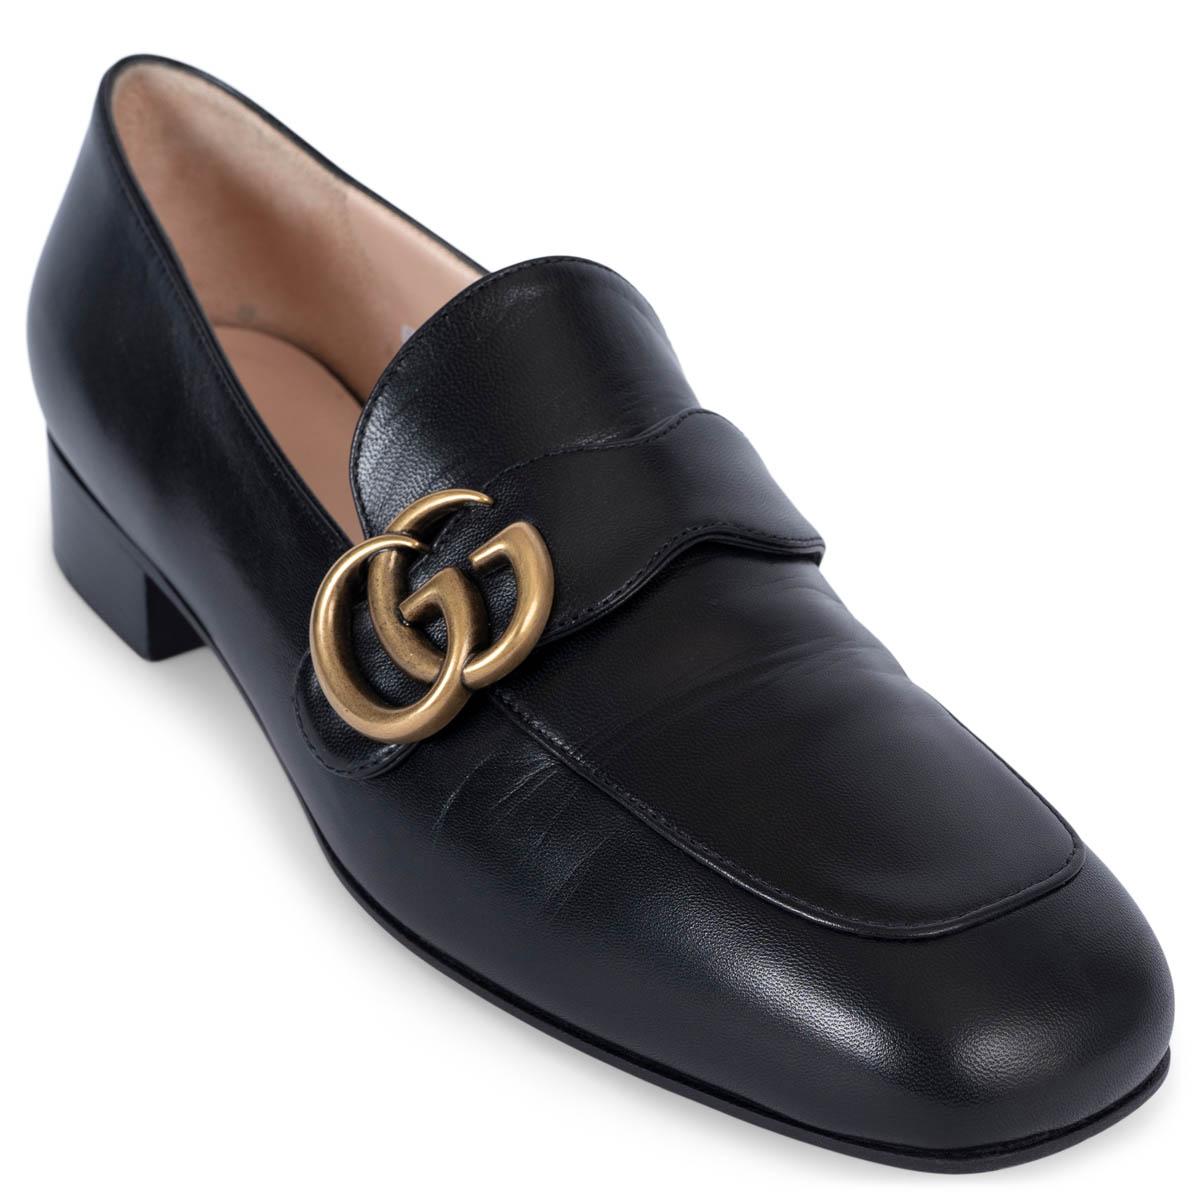 GUCCI black leather GG MARMONT Loafers Shoes 38 2